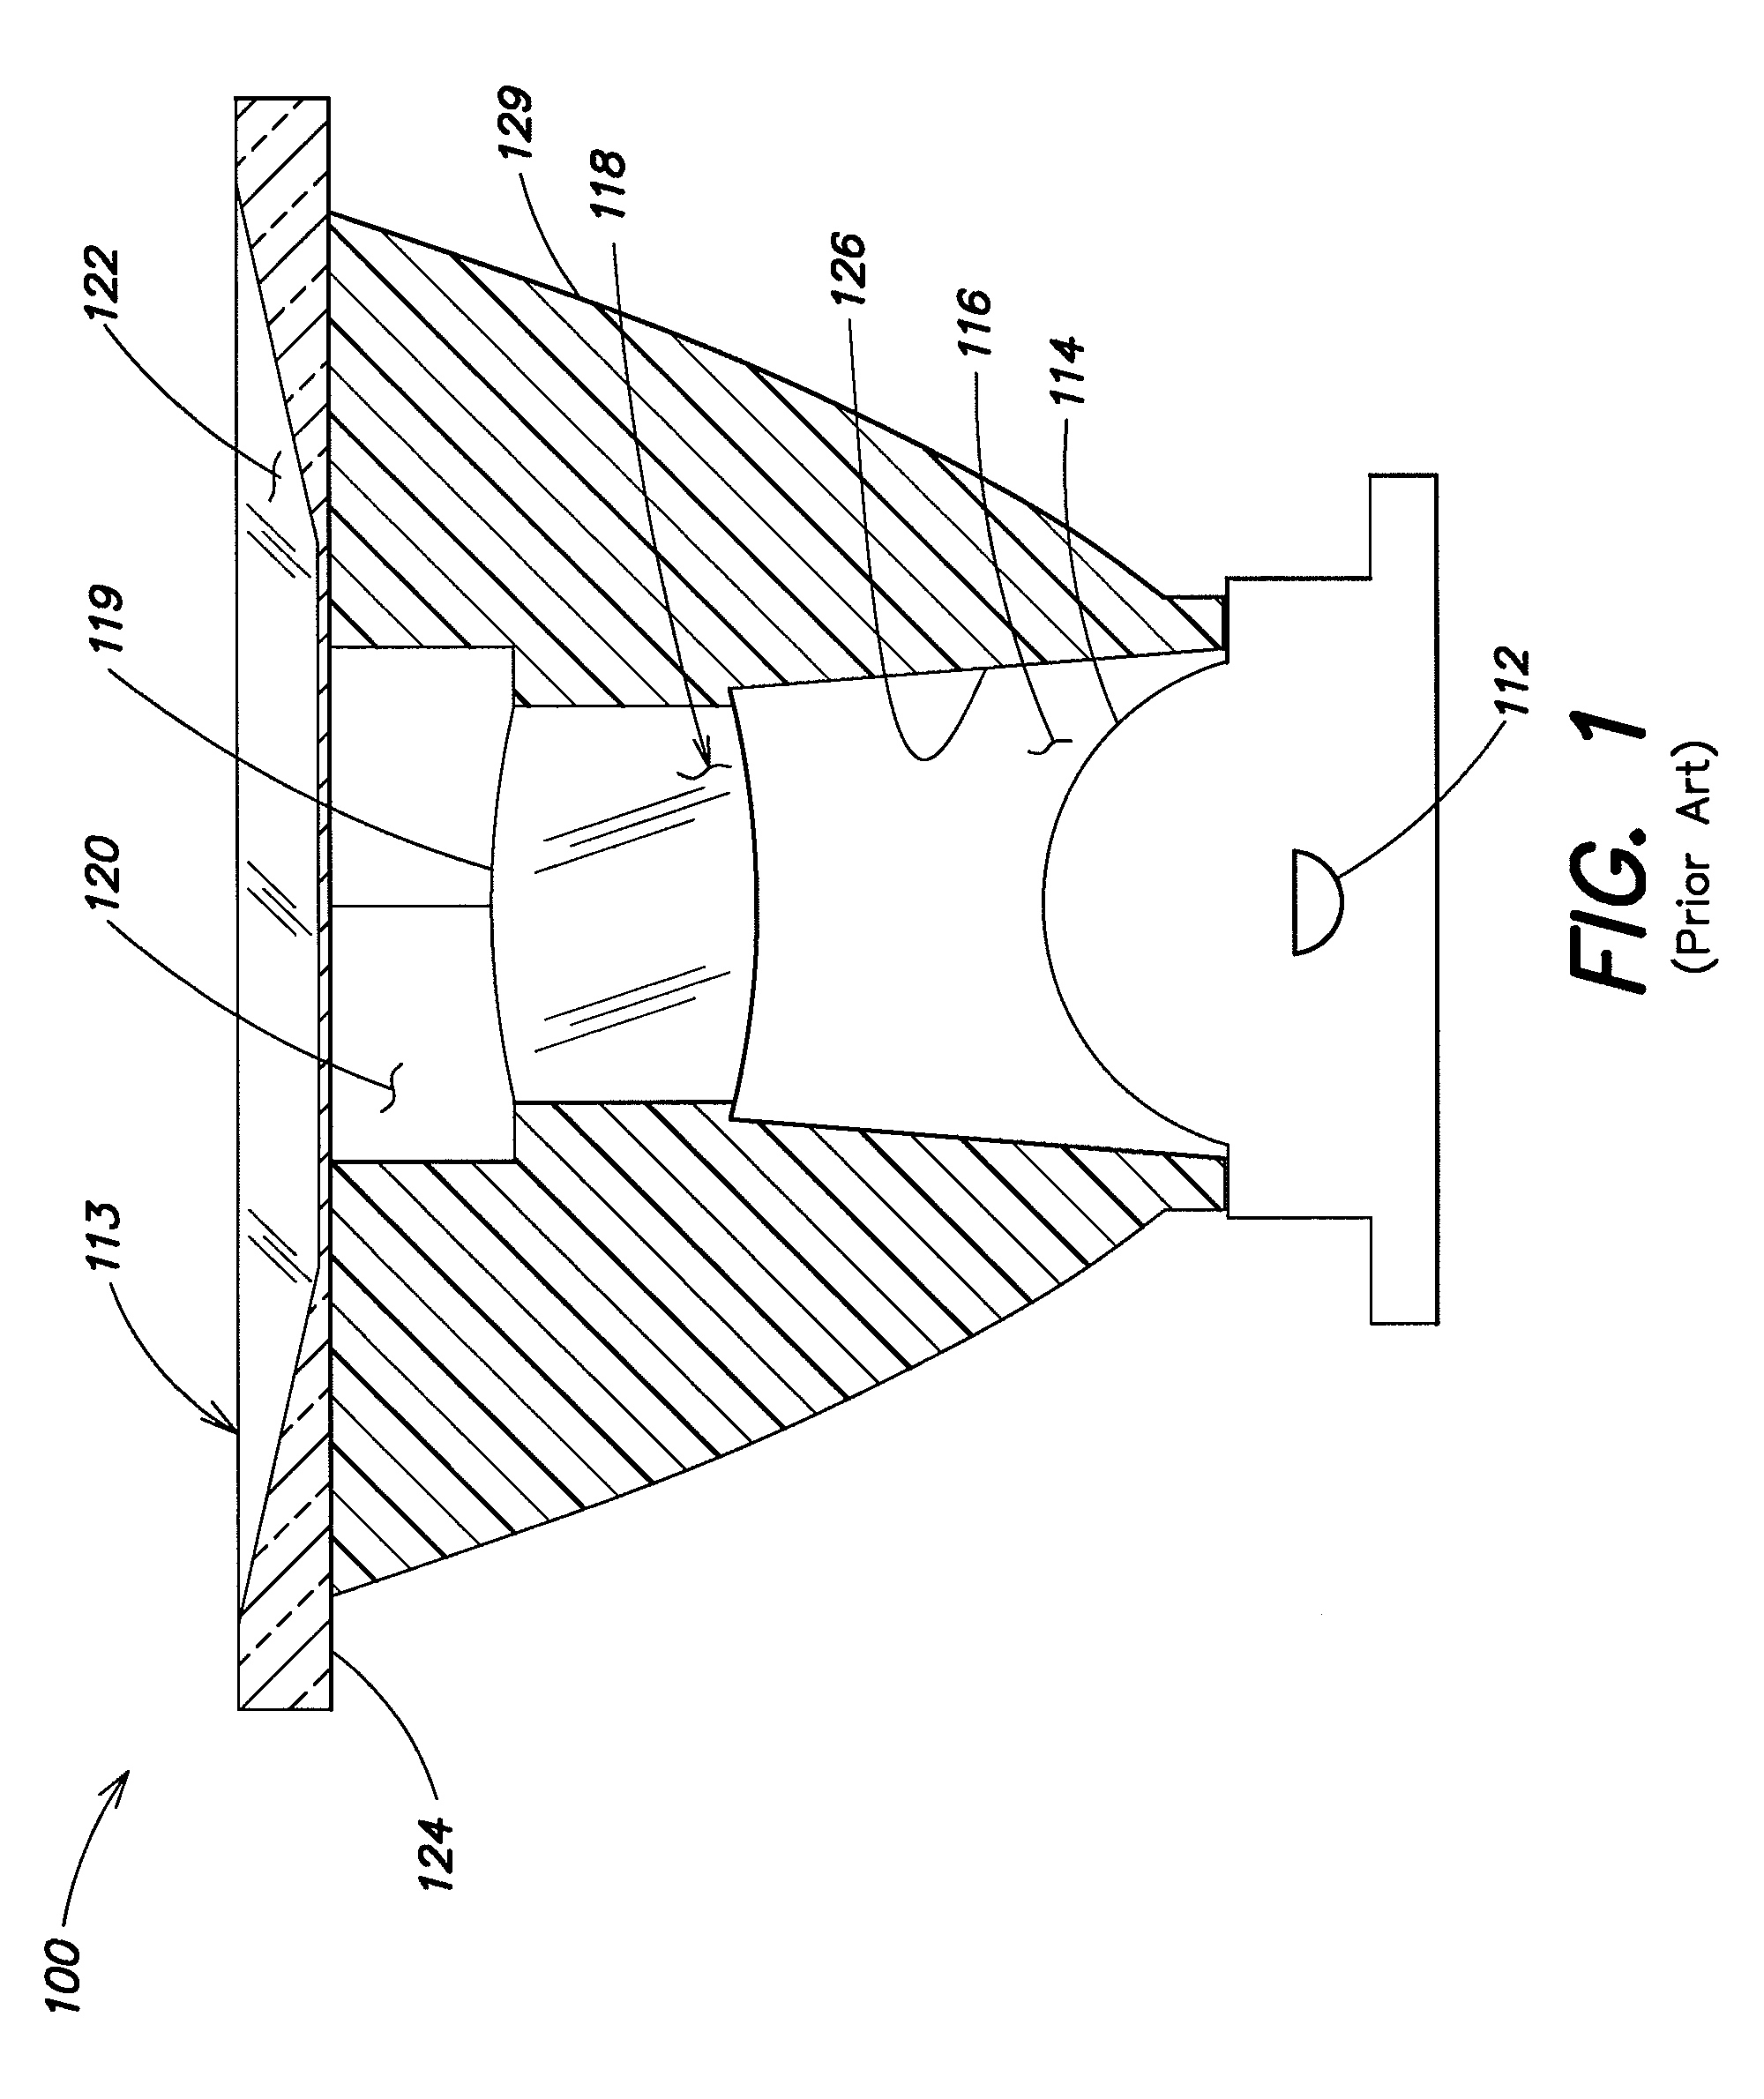 LED collimator having spline surfaces and related methods